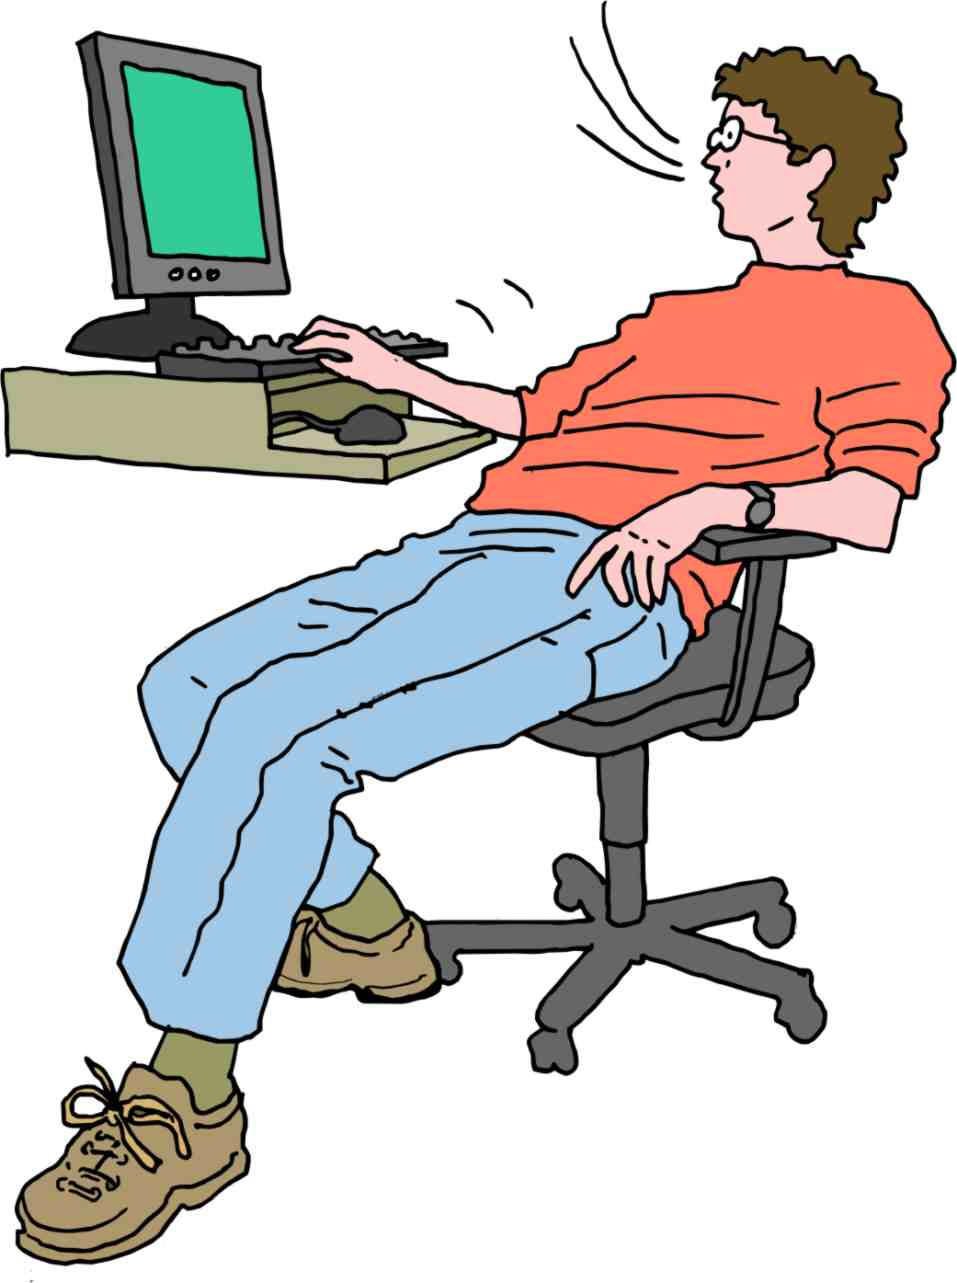 Slouching and Bad Posture Cause Low Brain and Body O2